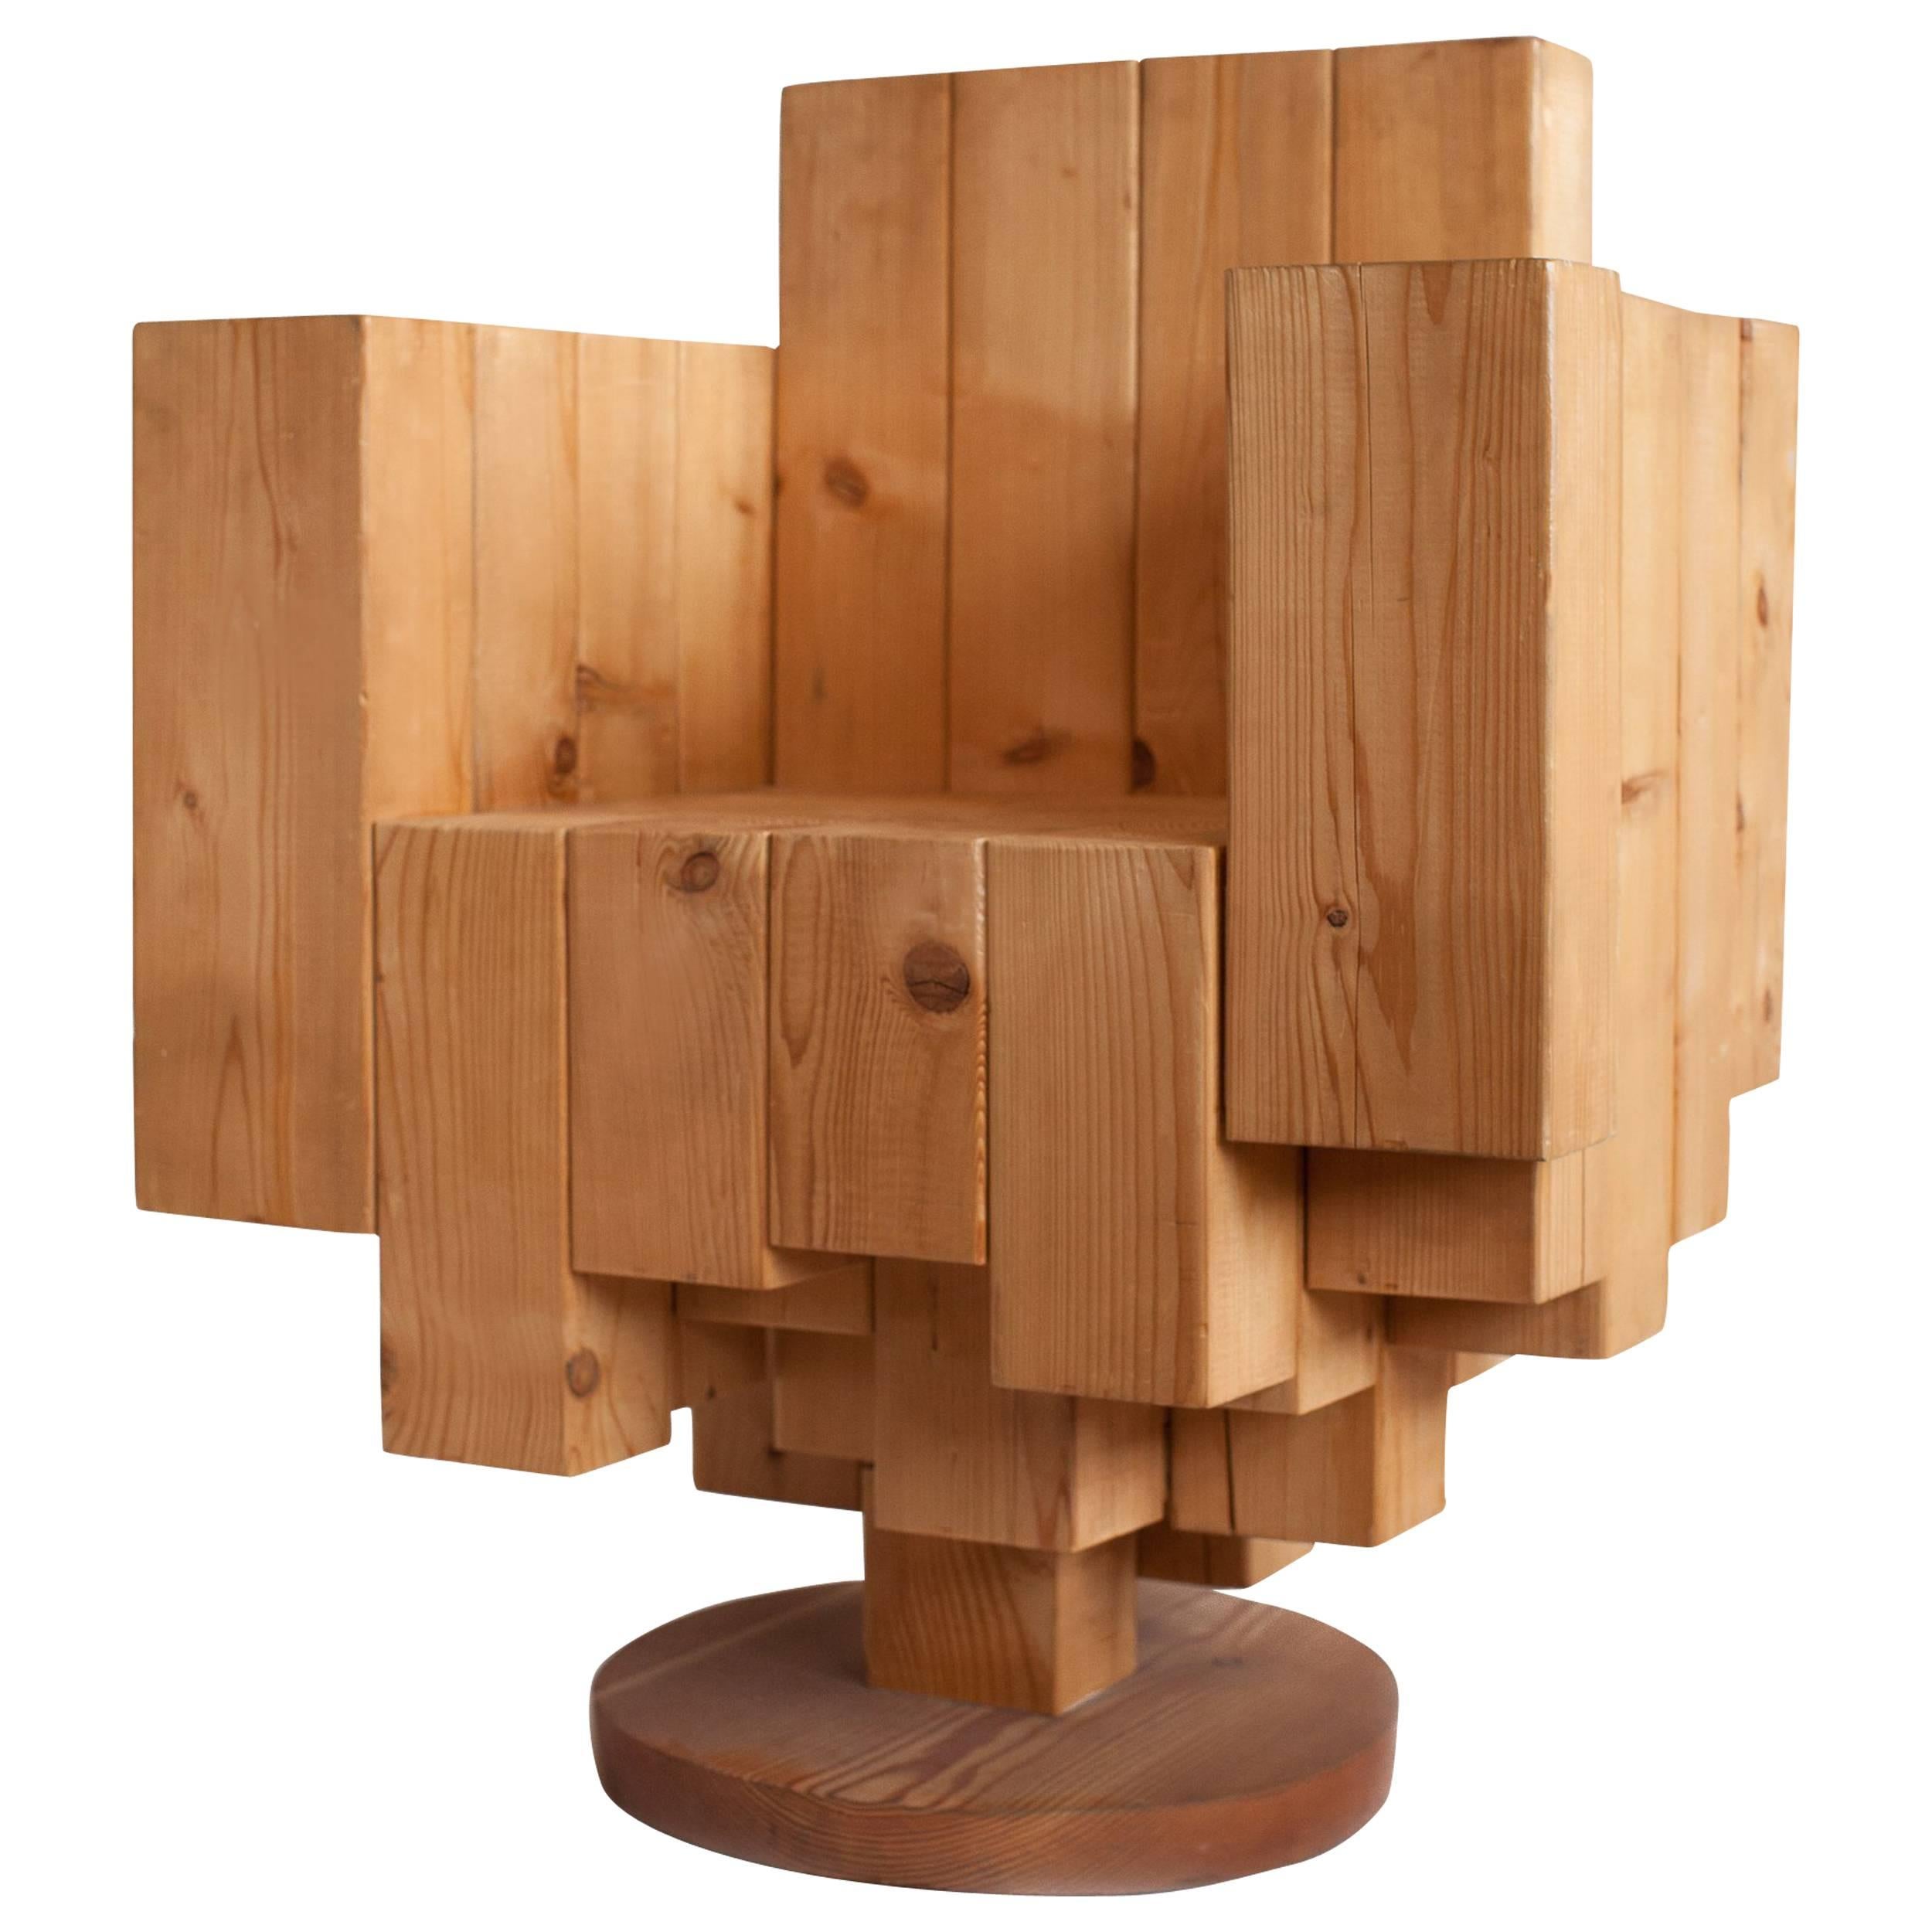 One of a Kind Sculptural Cubist Armchair in Pine by Giorgio Mariani, Italy 2005